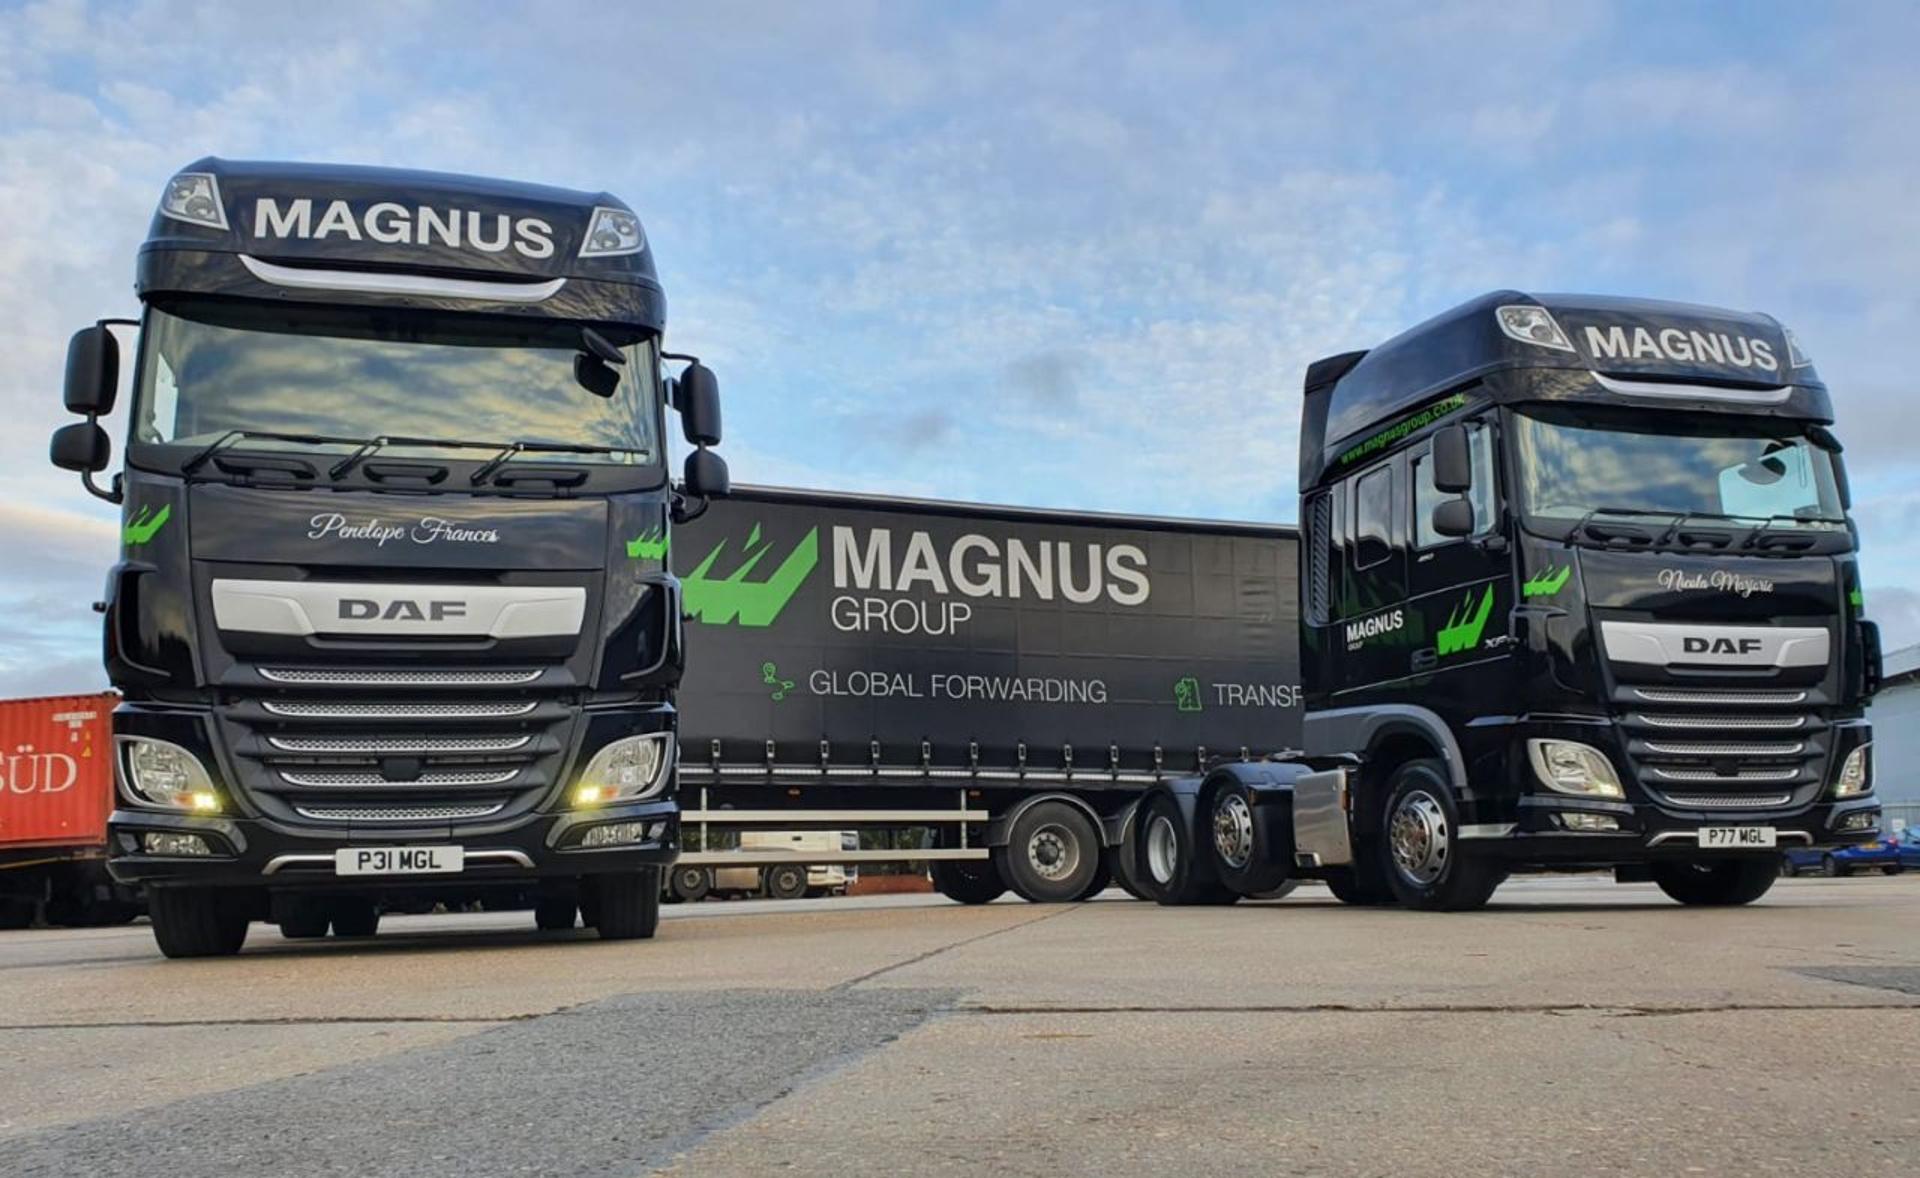 Logistics firm to acquire Magnus Group warehousing operation